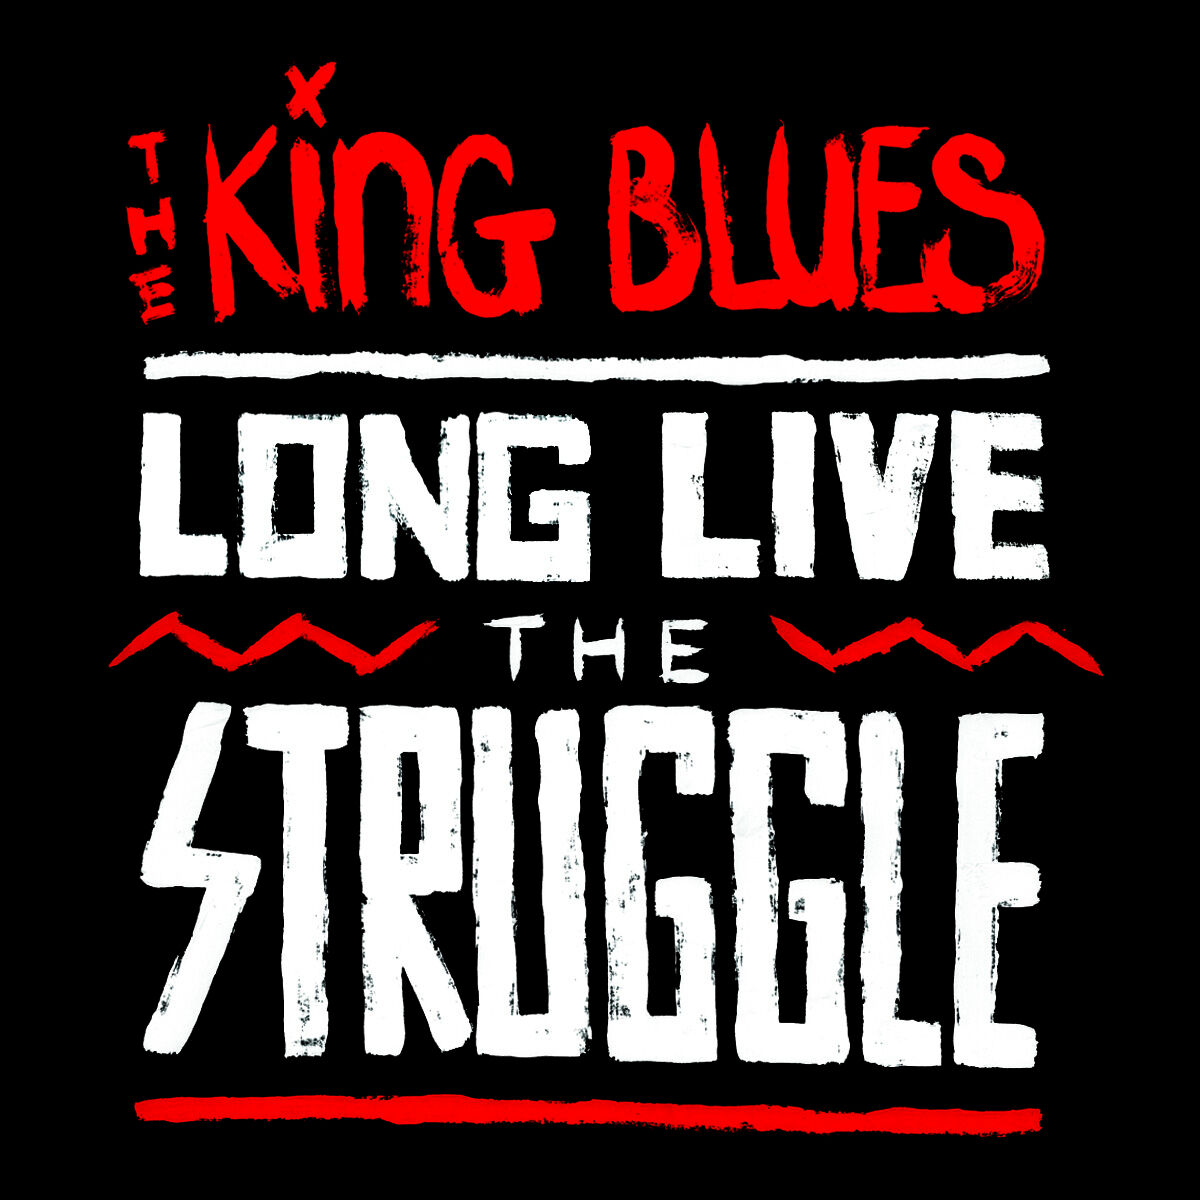 The King Blues: albums, songs, playlists | Listen on Deezer